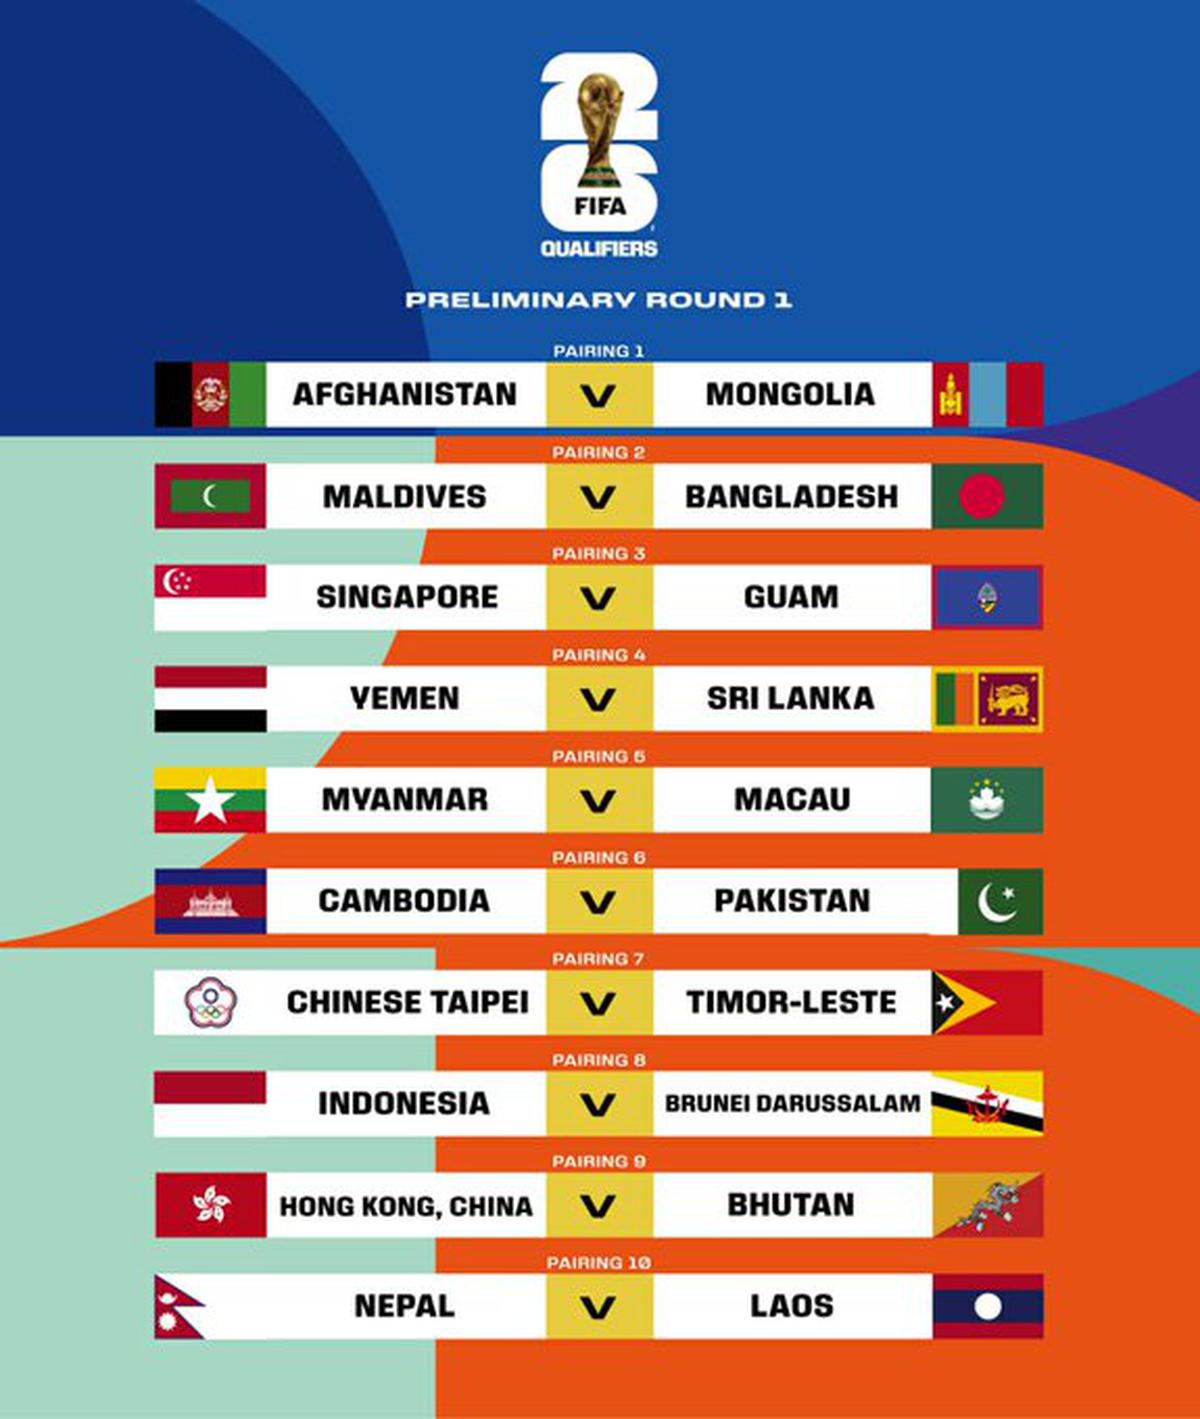 AFC FIFA World Cup 2026 qualifiers draw Round 2 highlights India in Group A with Asian champion Qatar, Kuwait and Afghanistan/Mongolia